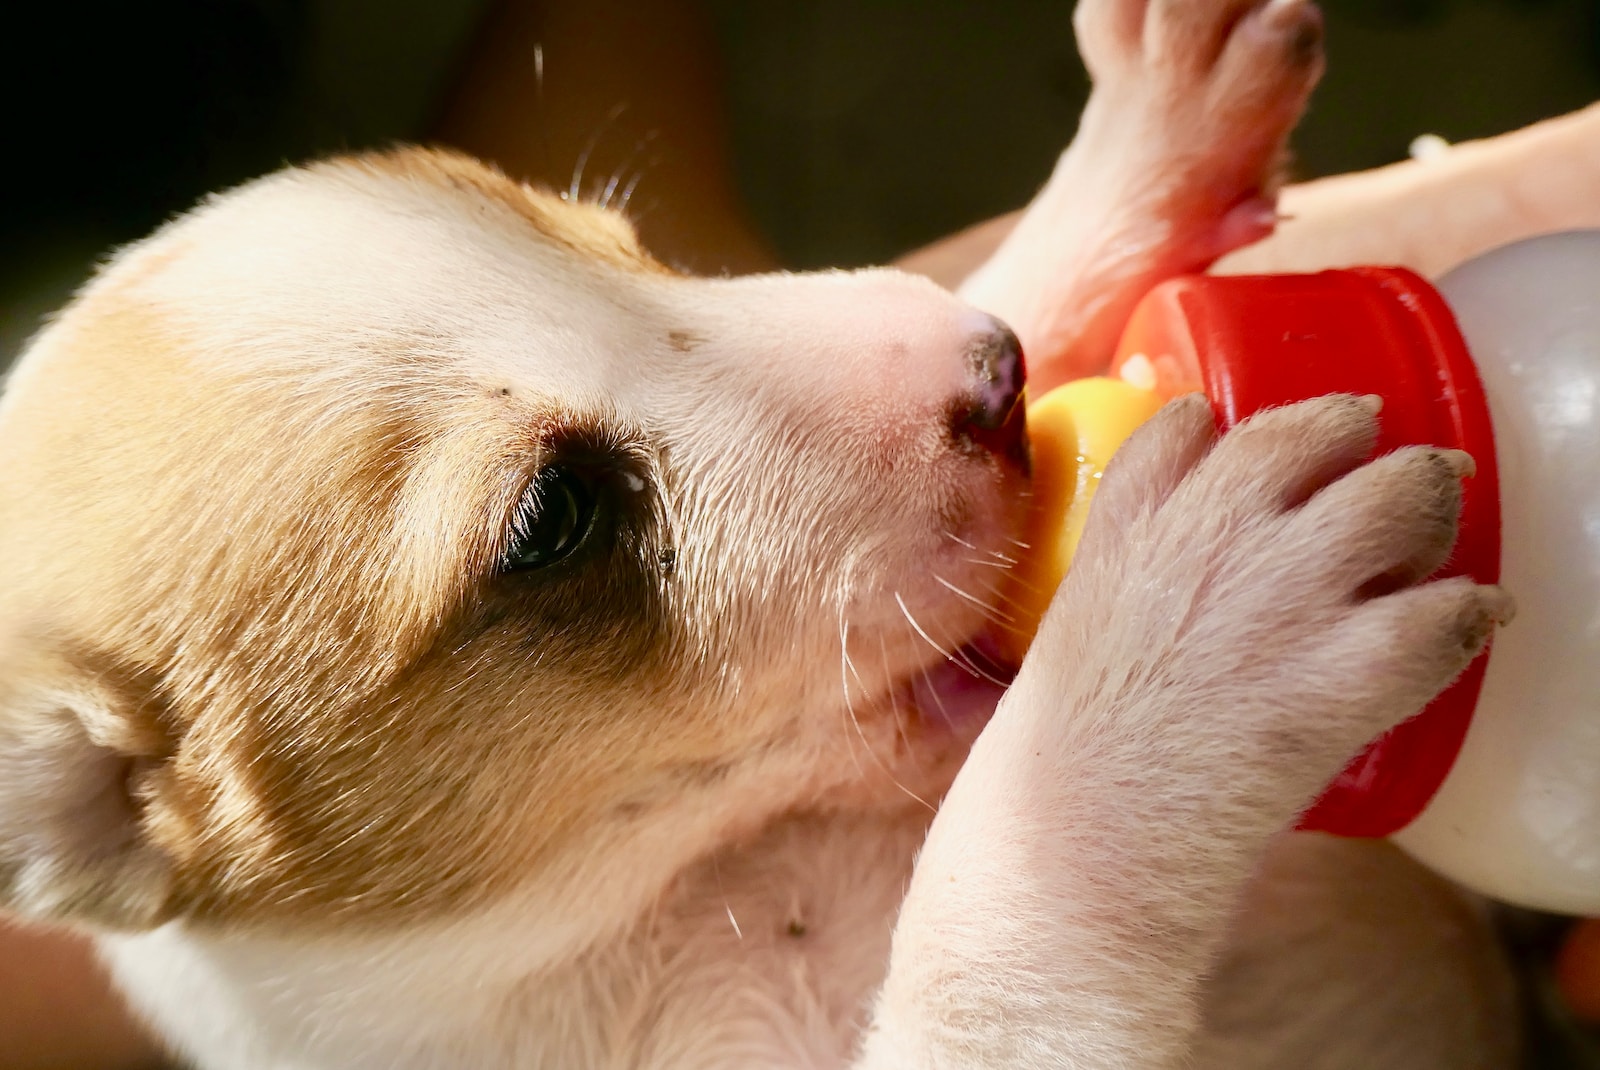 a small brown and white dog drinking from a bottle